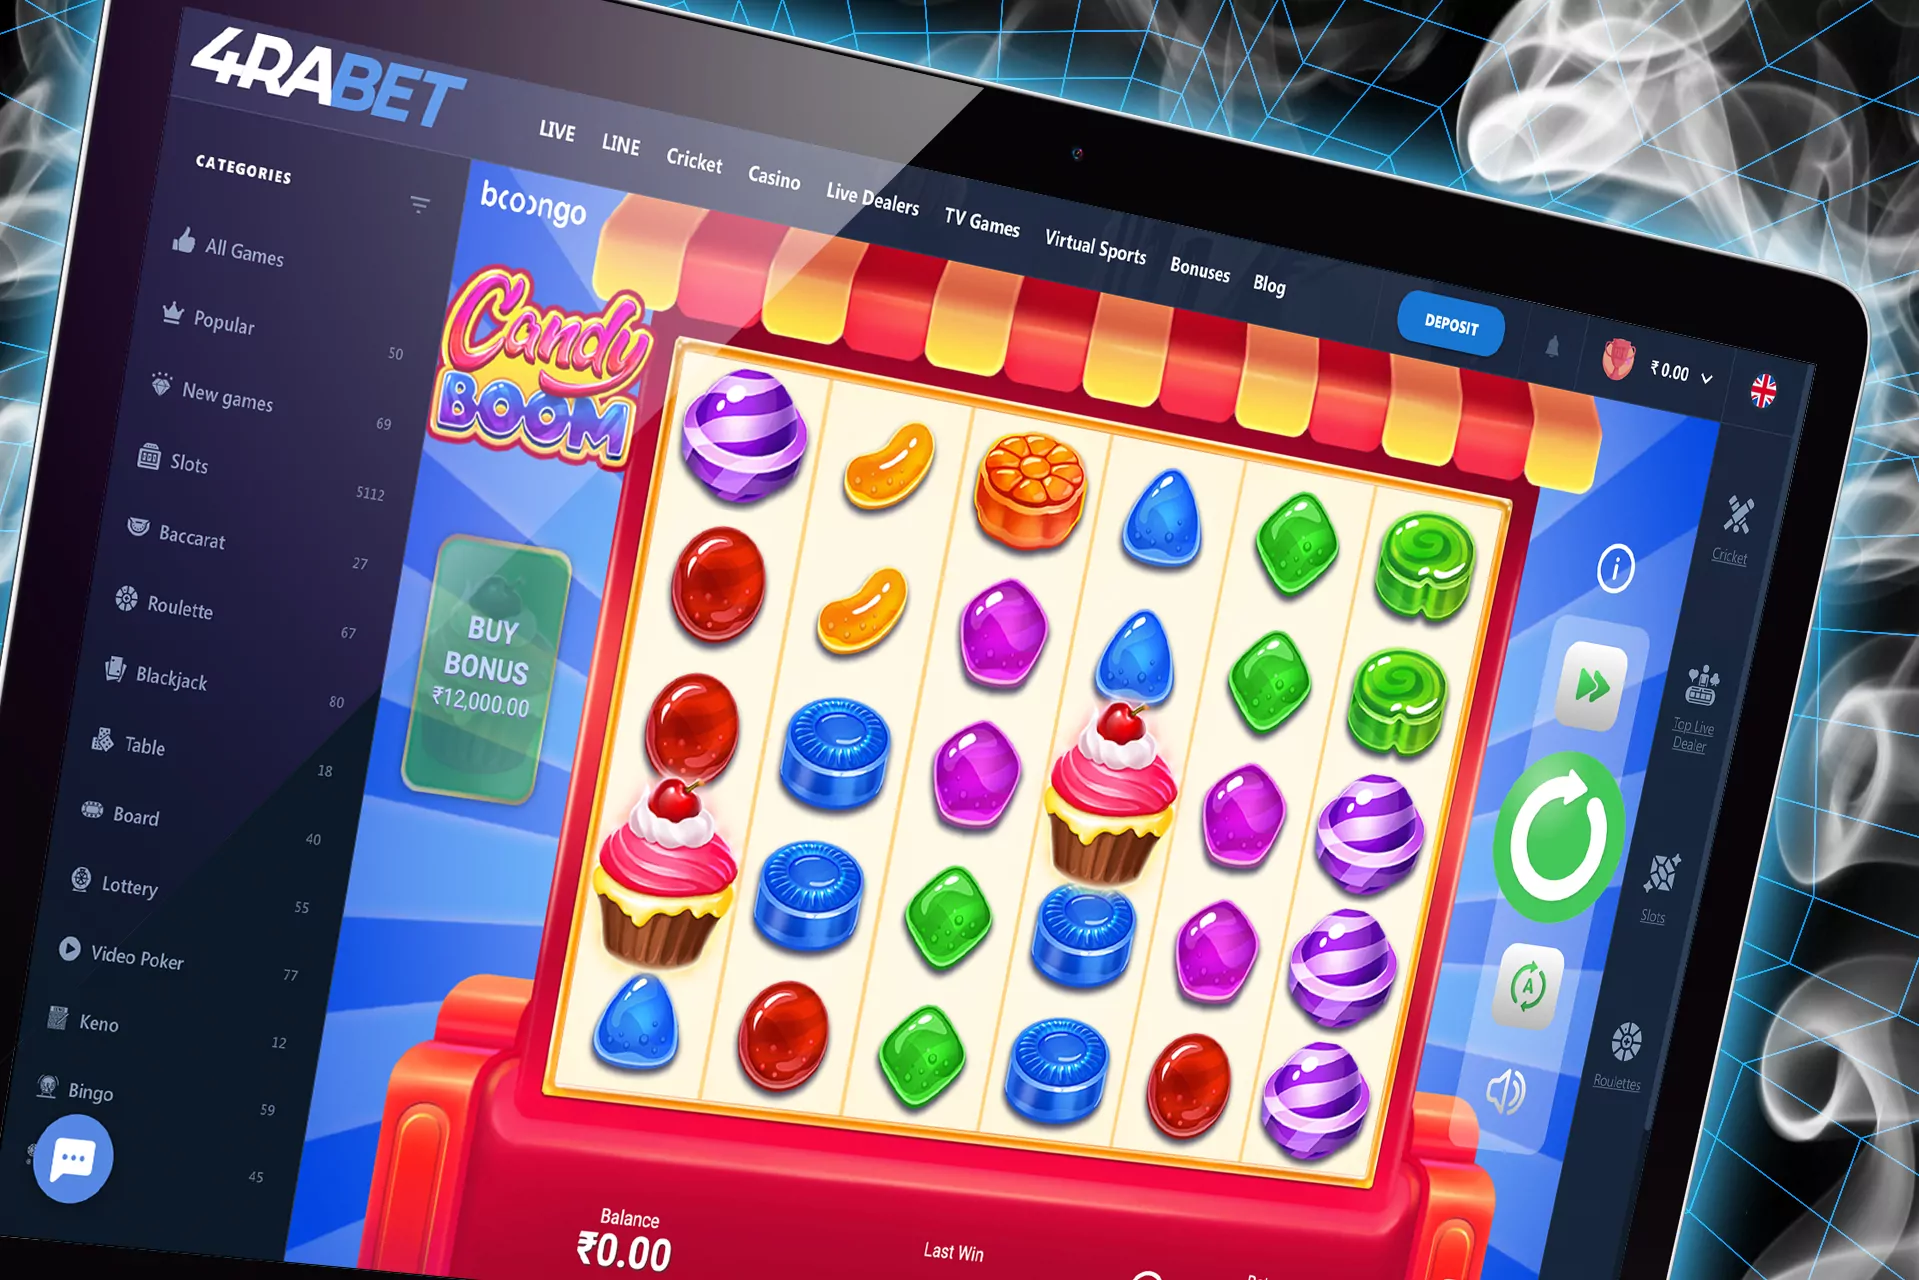 Candy boom are ranked among the most popular casino games in 4Rabet.